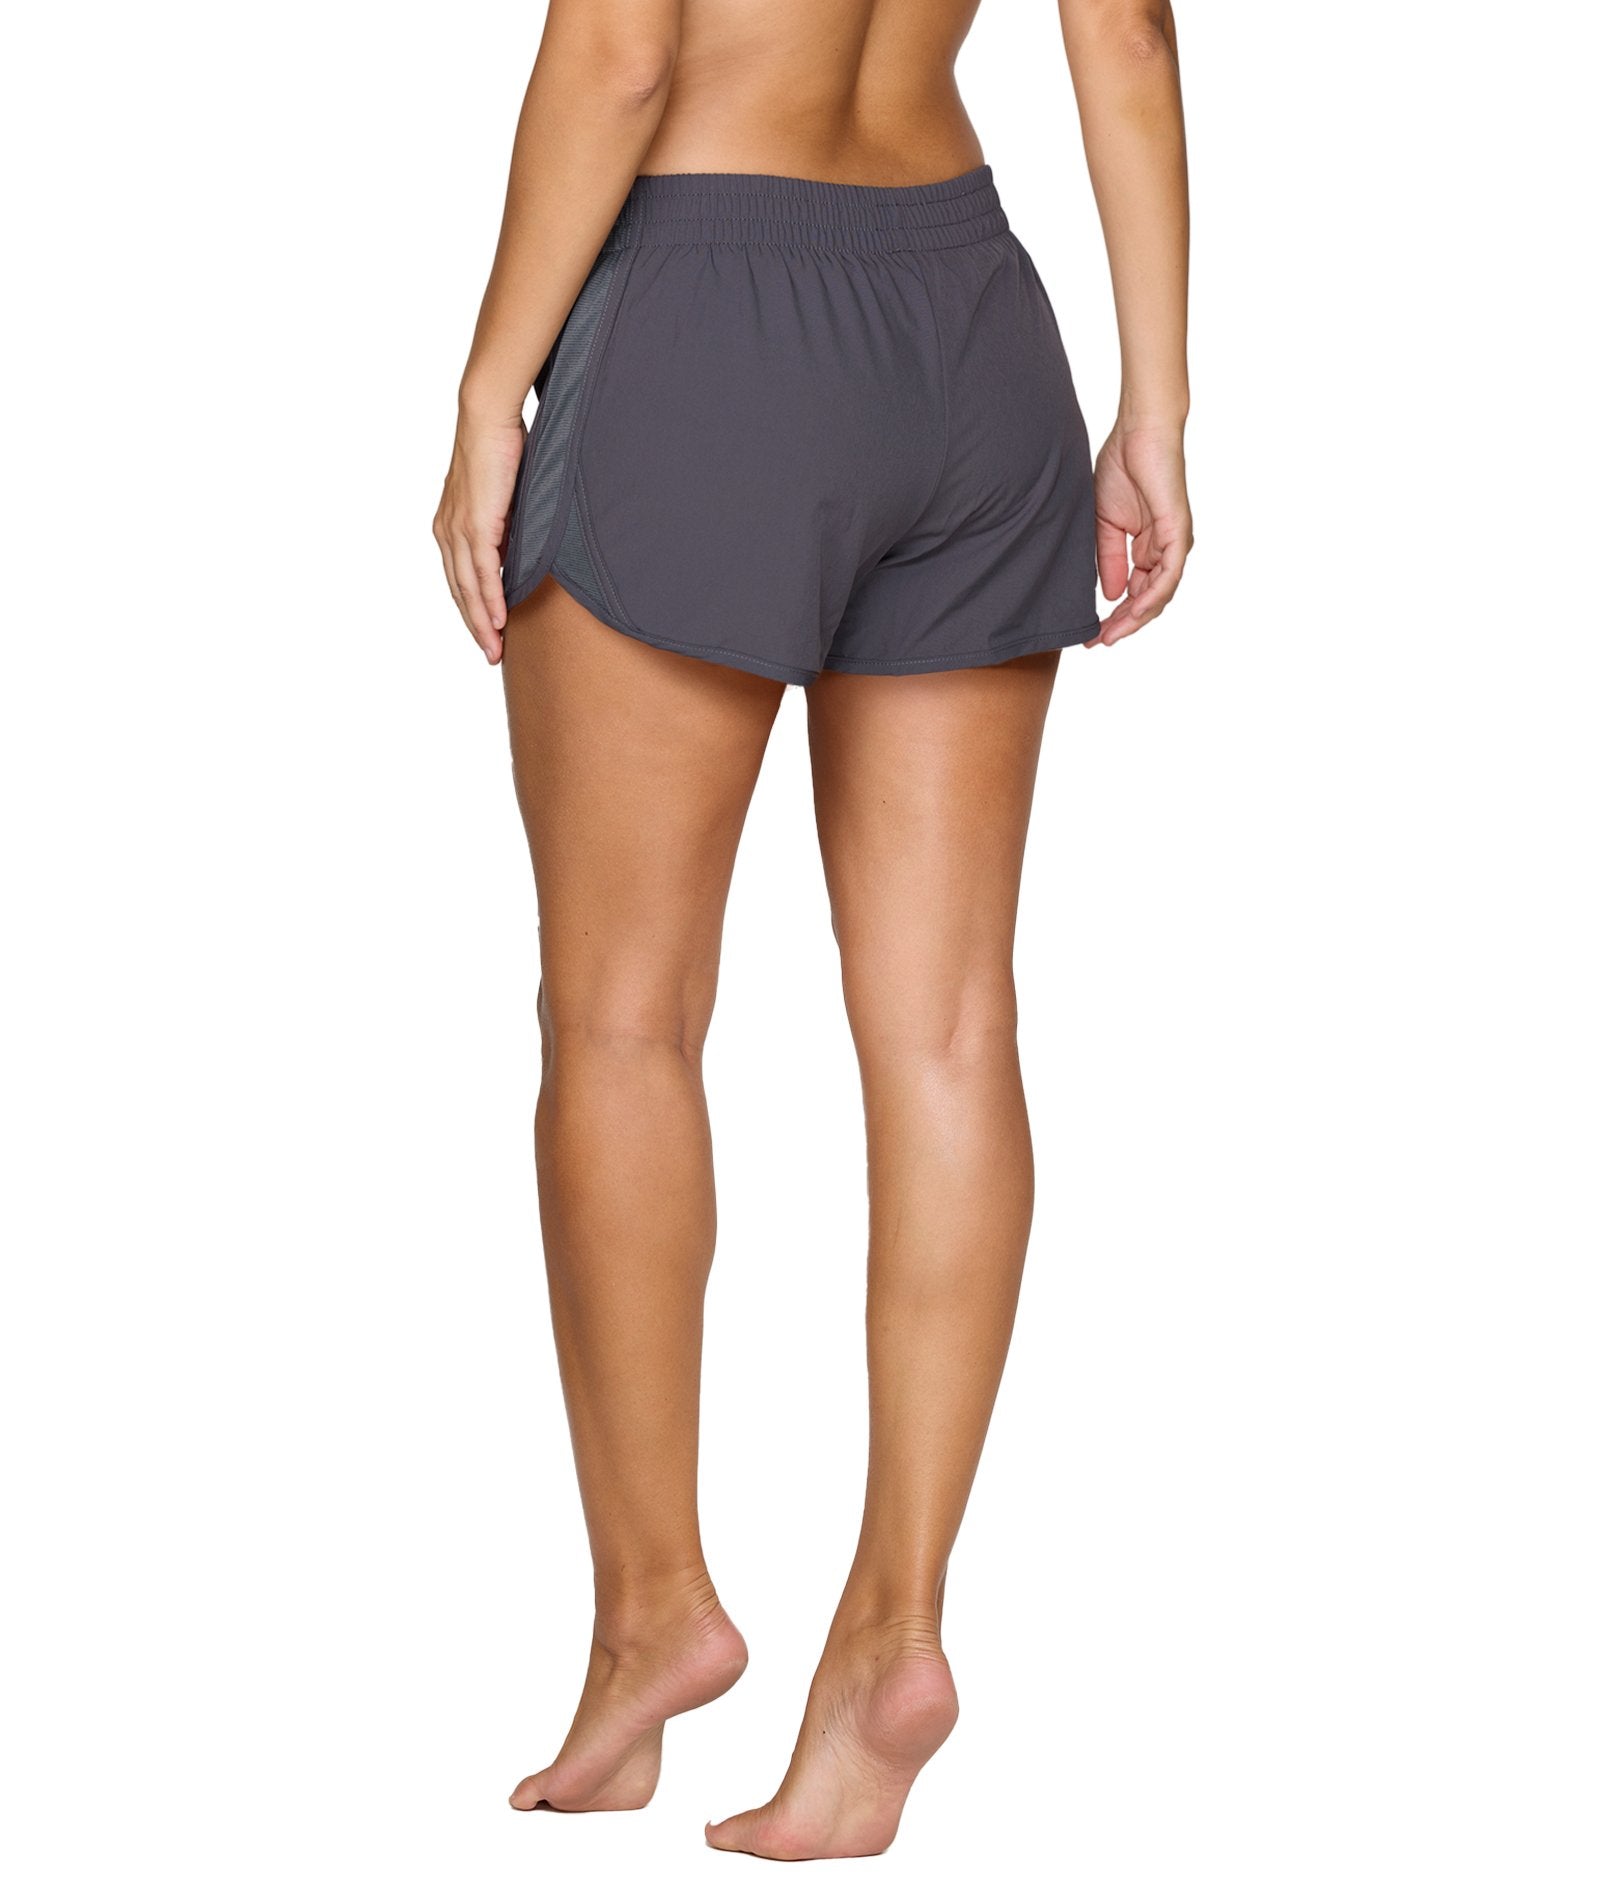 Women's Charcoal Afloat Recycled Running Short with Liner